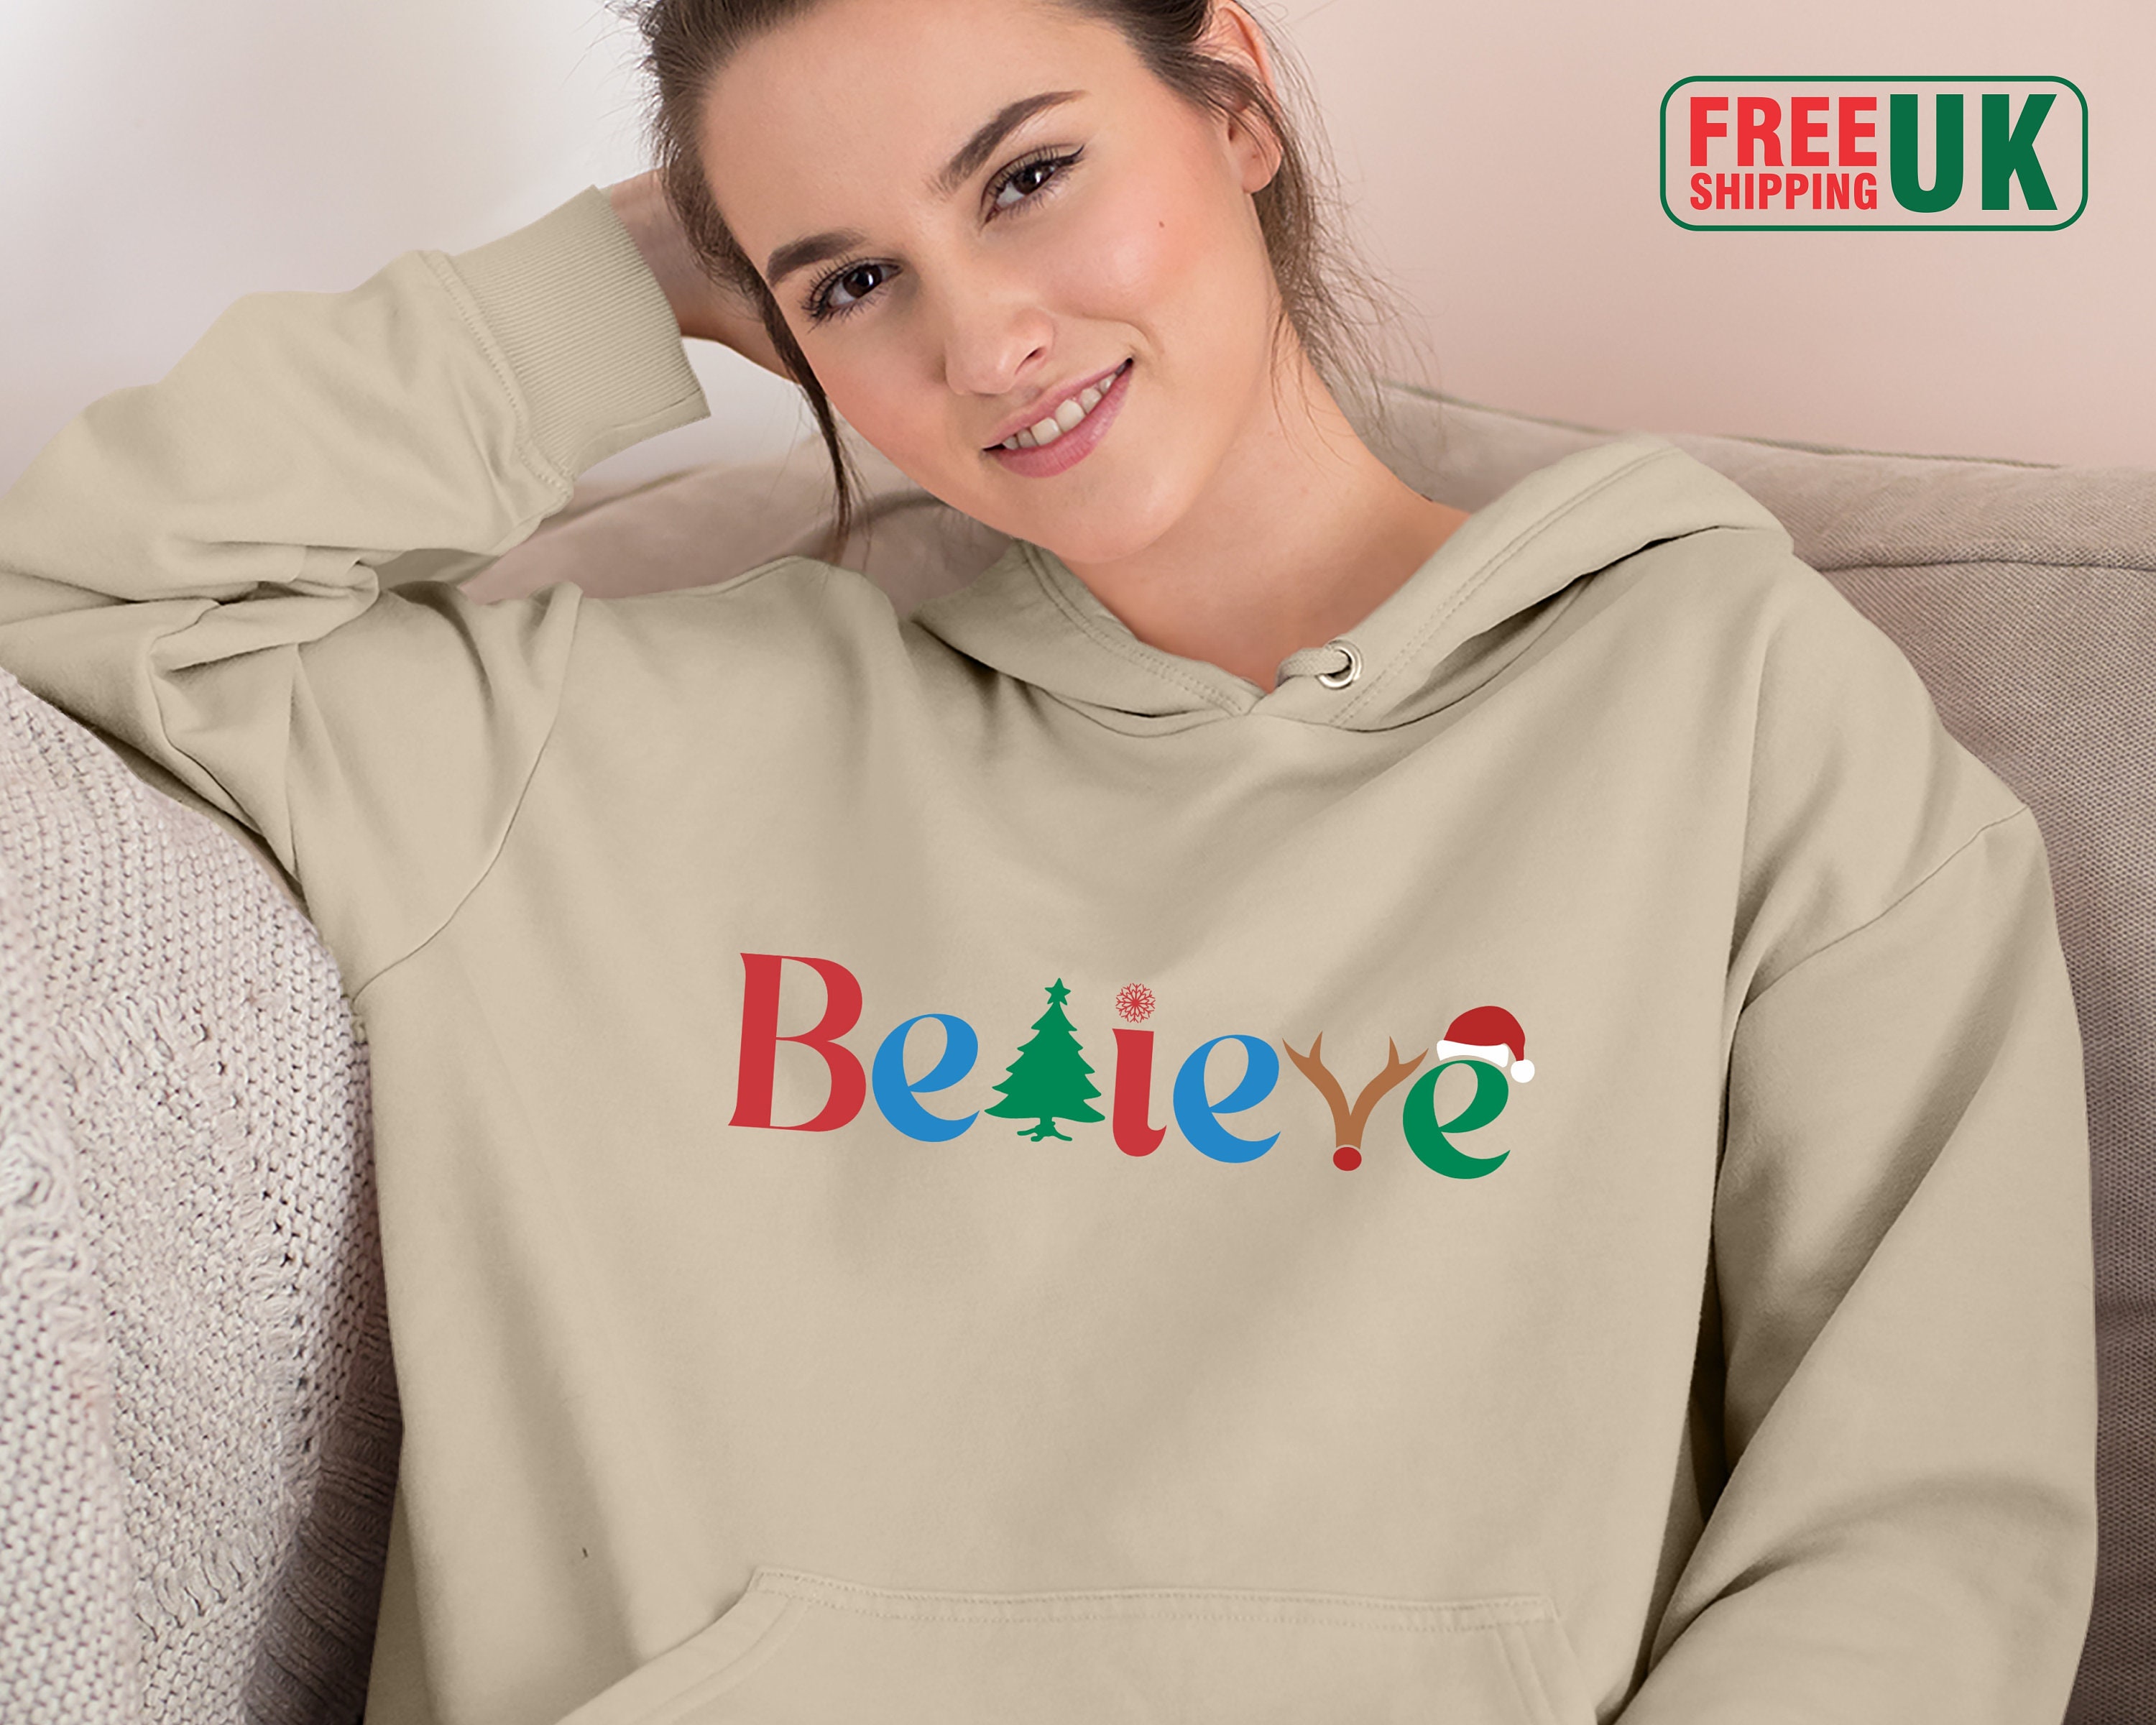 Gnome Reindeer Graphic Tops Long Sleeve Sweater Plus Size Trendy Hooded Sweatshirts AODONG Christmas Hoodies for Women 